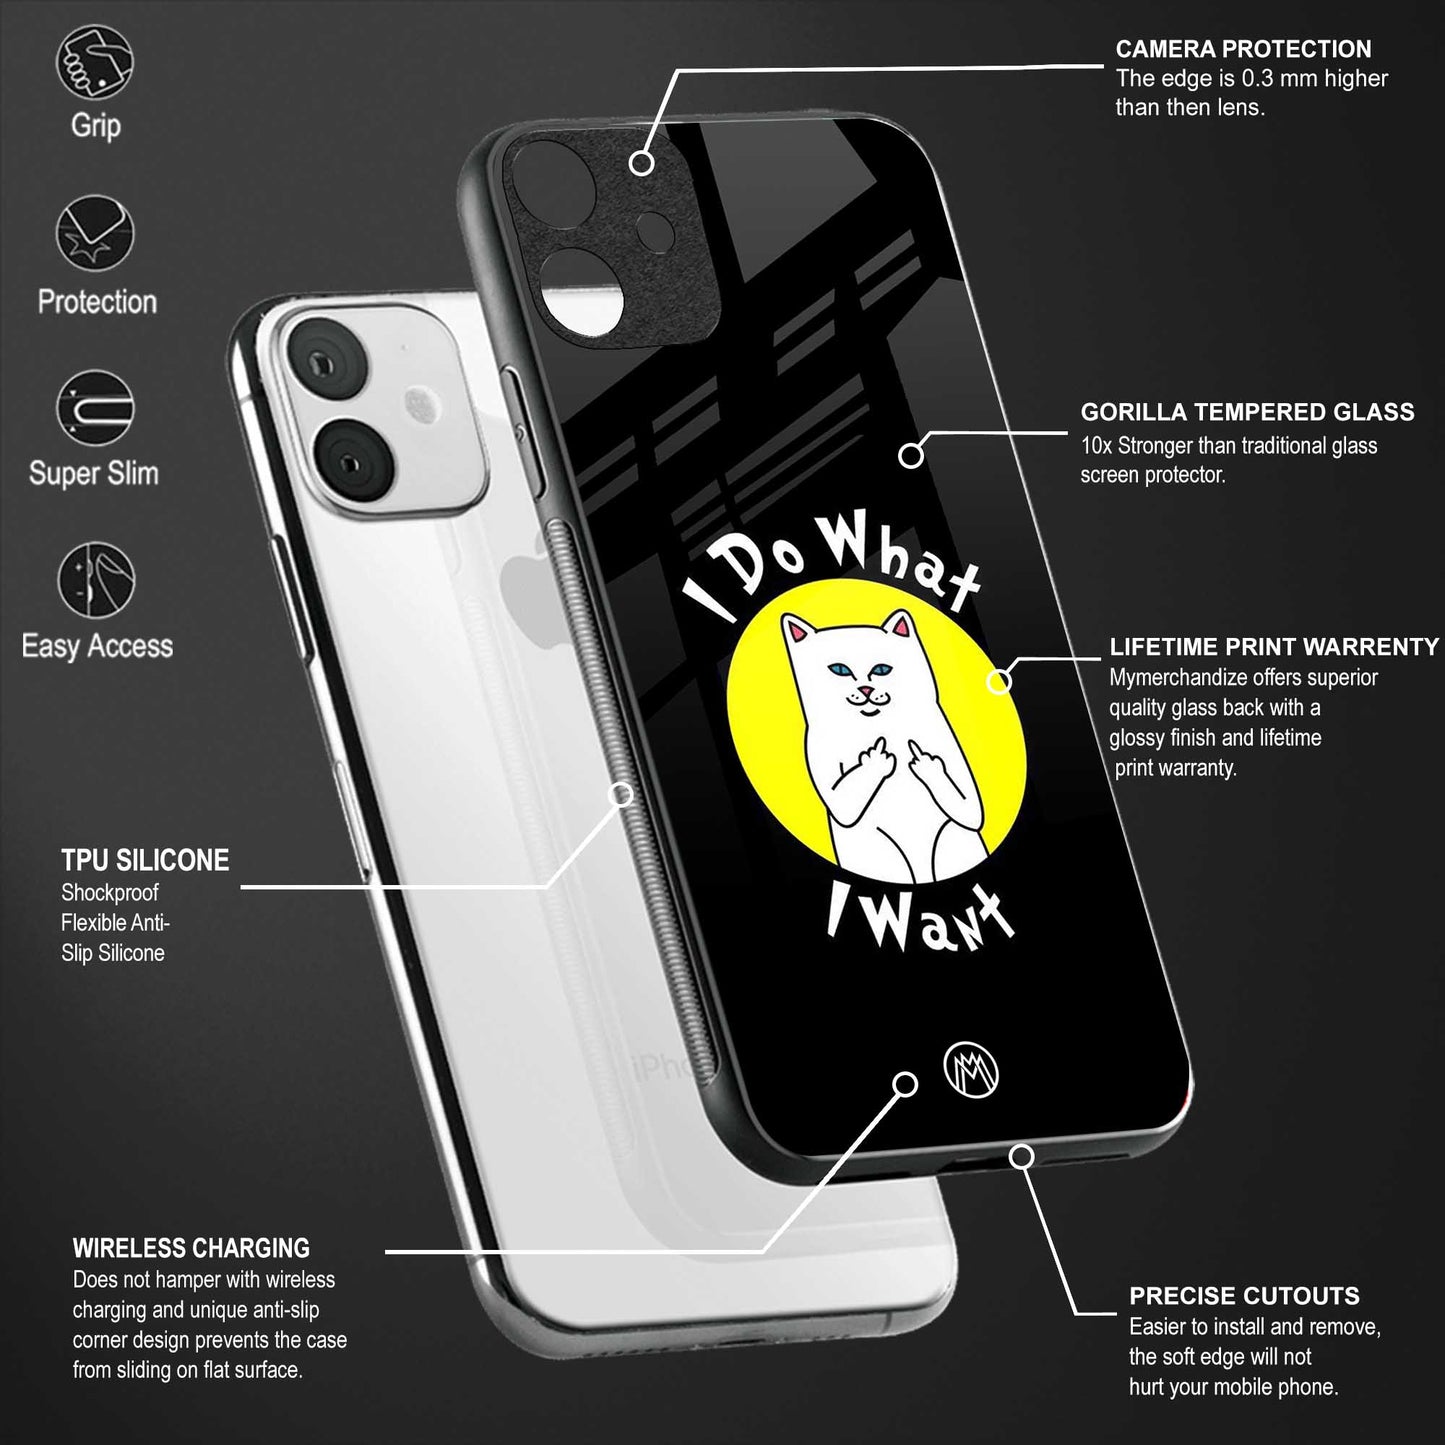 i do what i want glass case for samsung galaxy m31